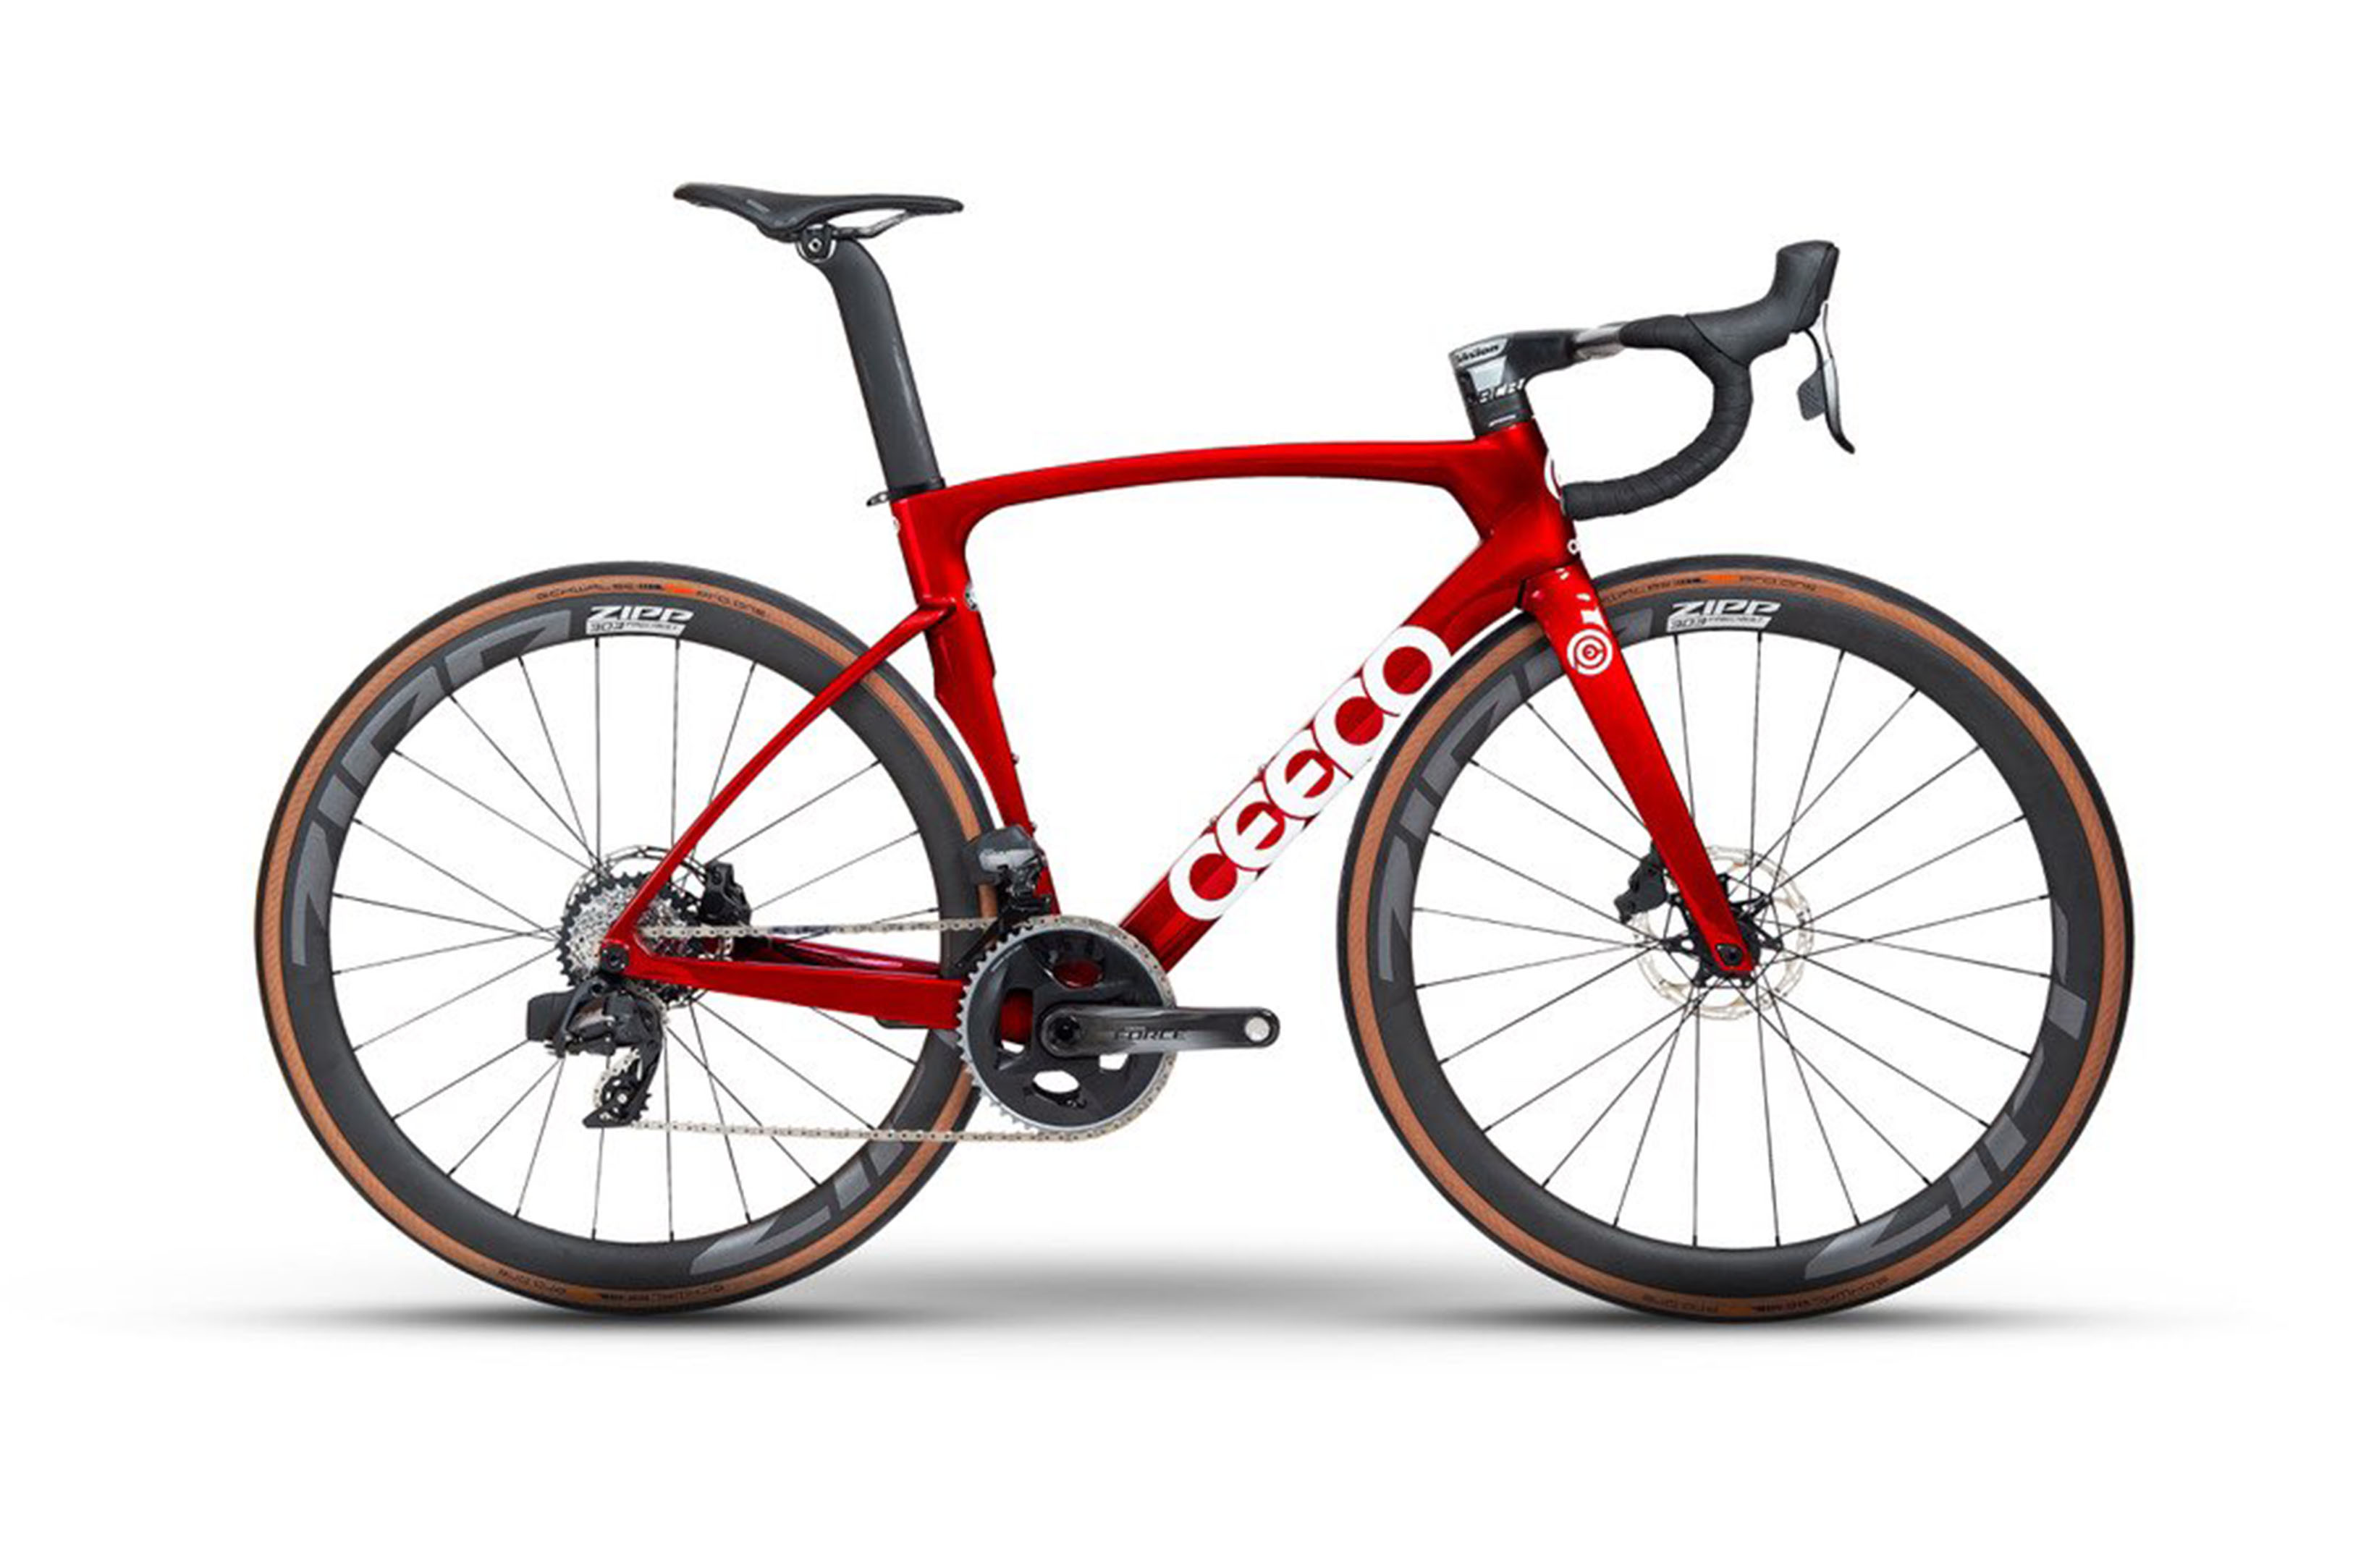 Ceepo bikes for road bike and triathlon half and full distance. A 